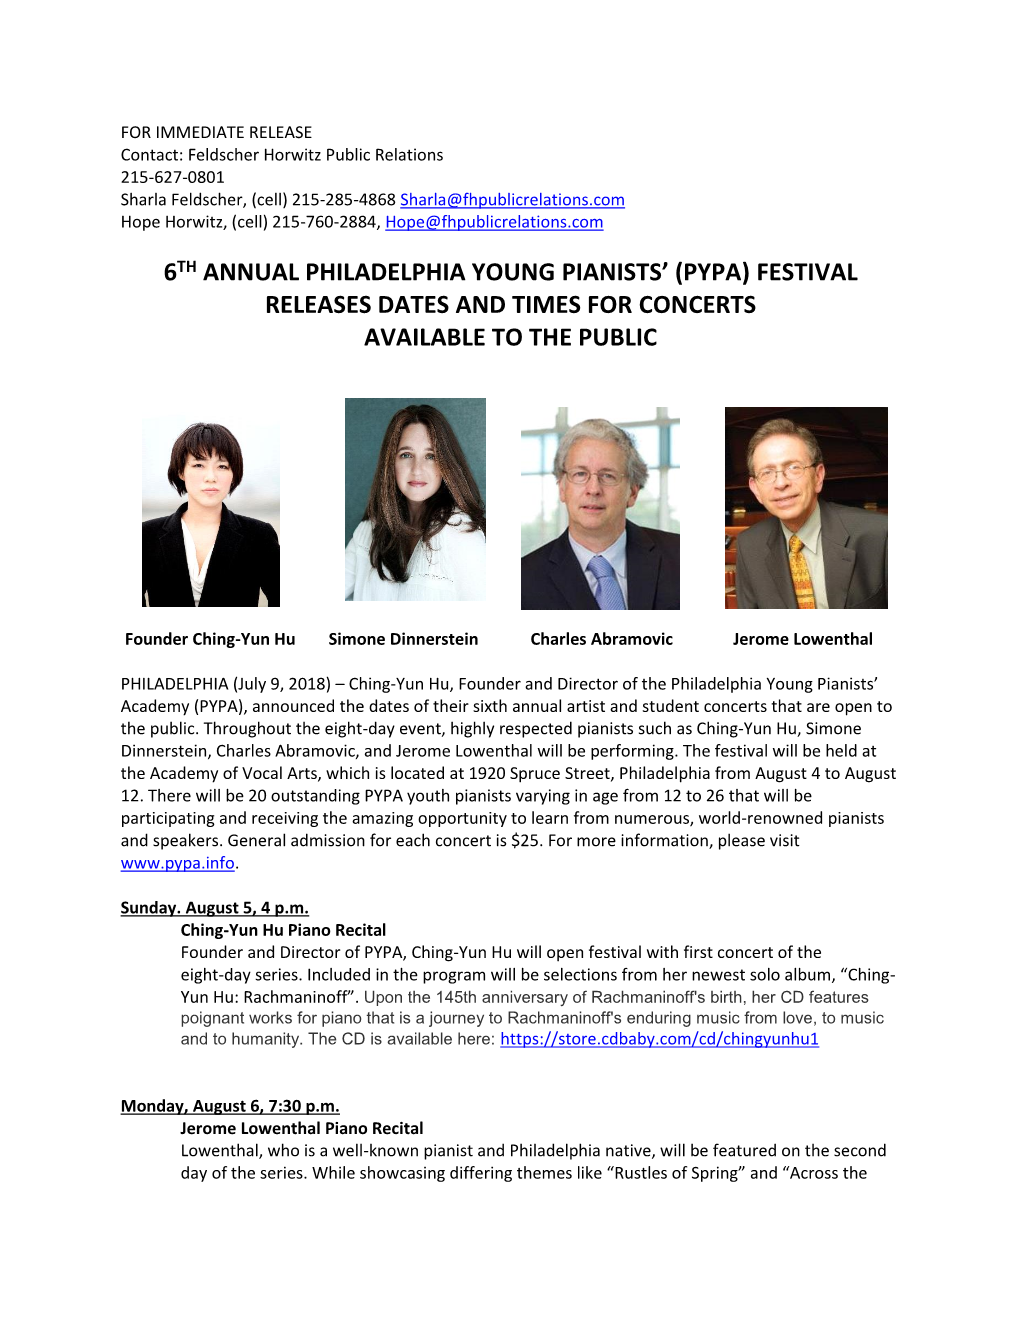 6Th Annual Philadelphia Young Pianists' (Pypa